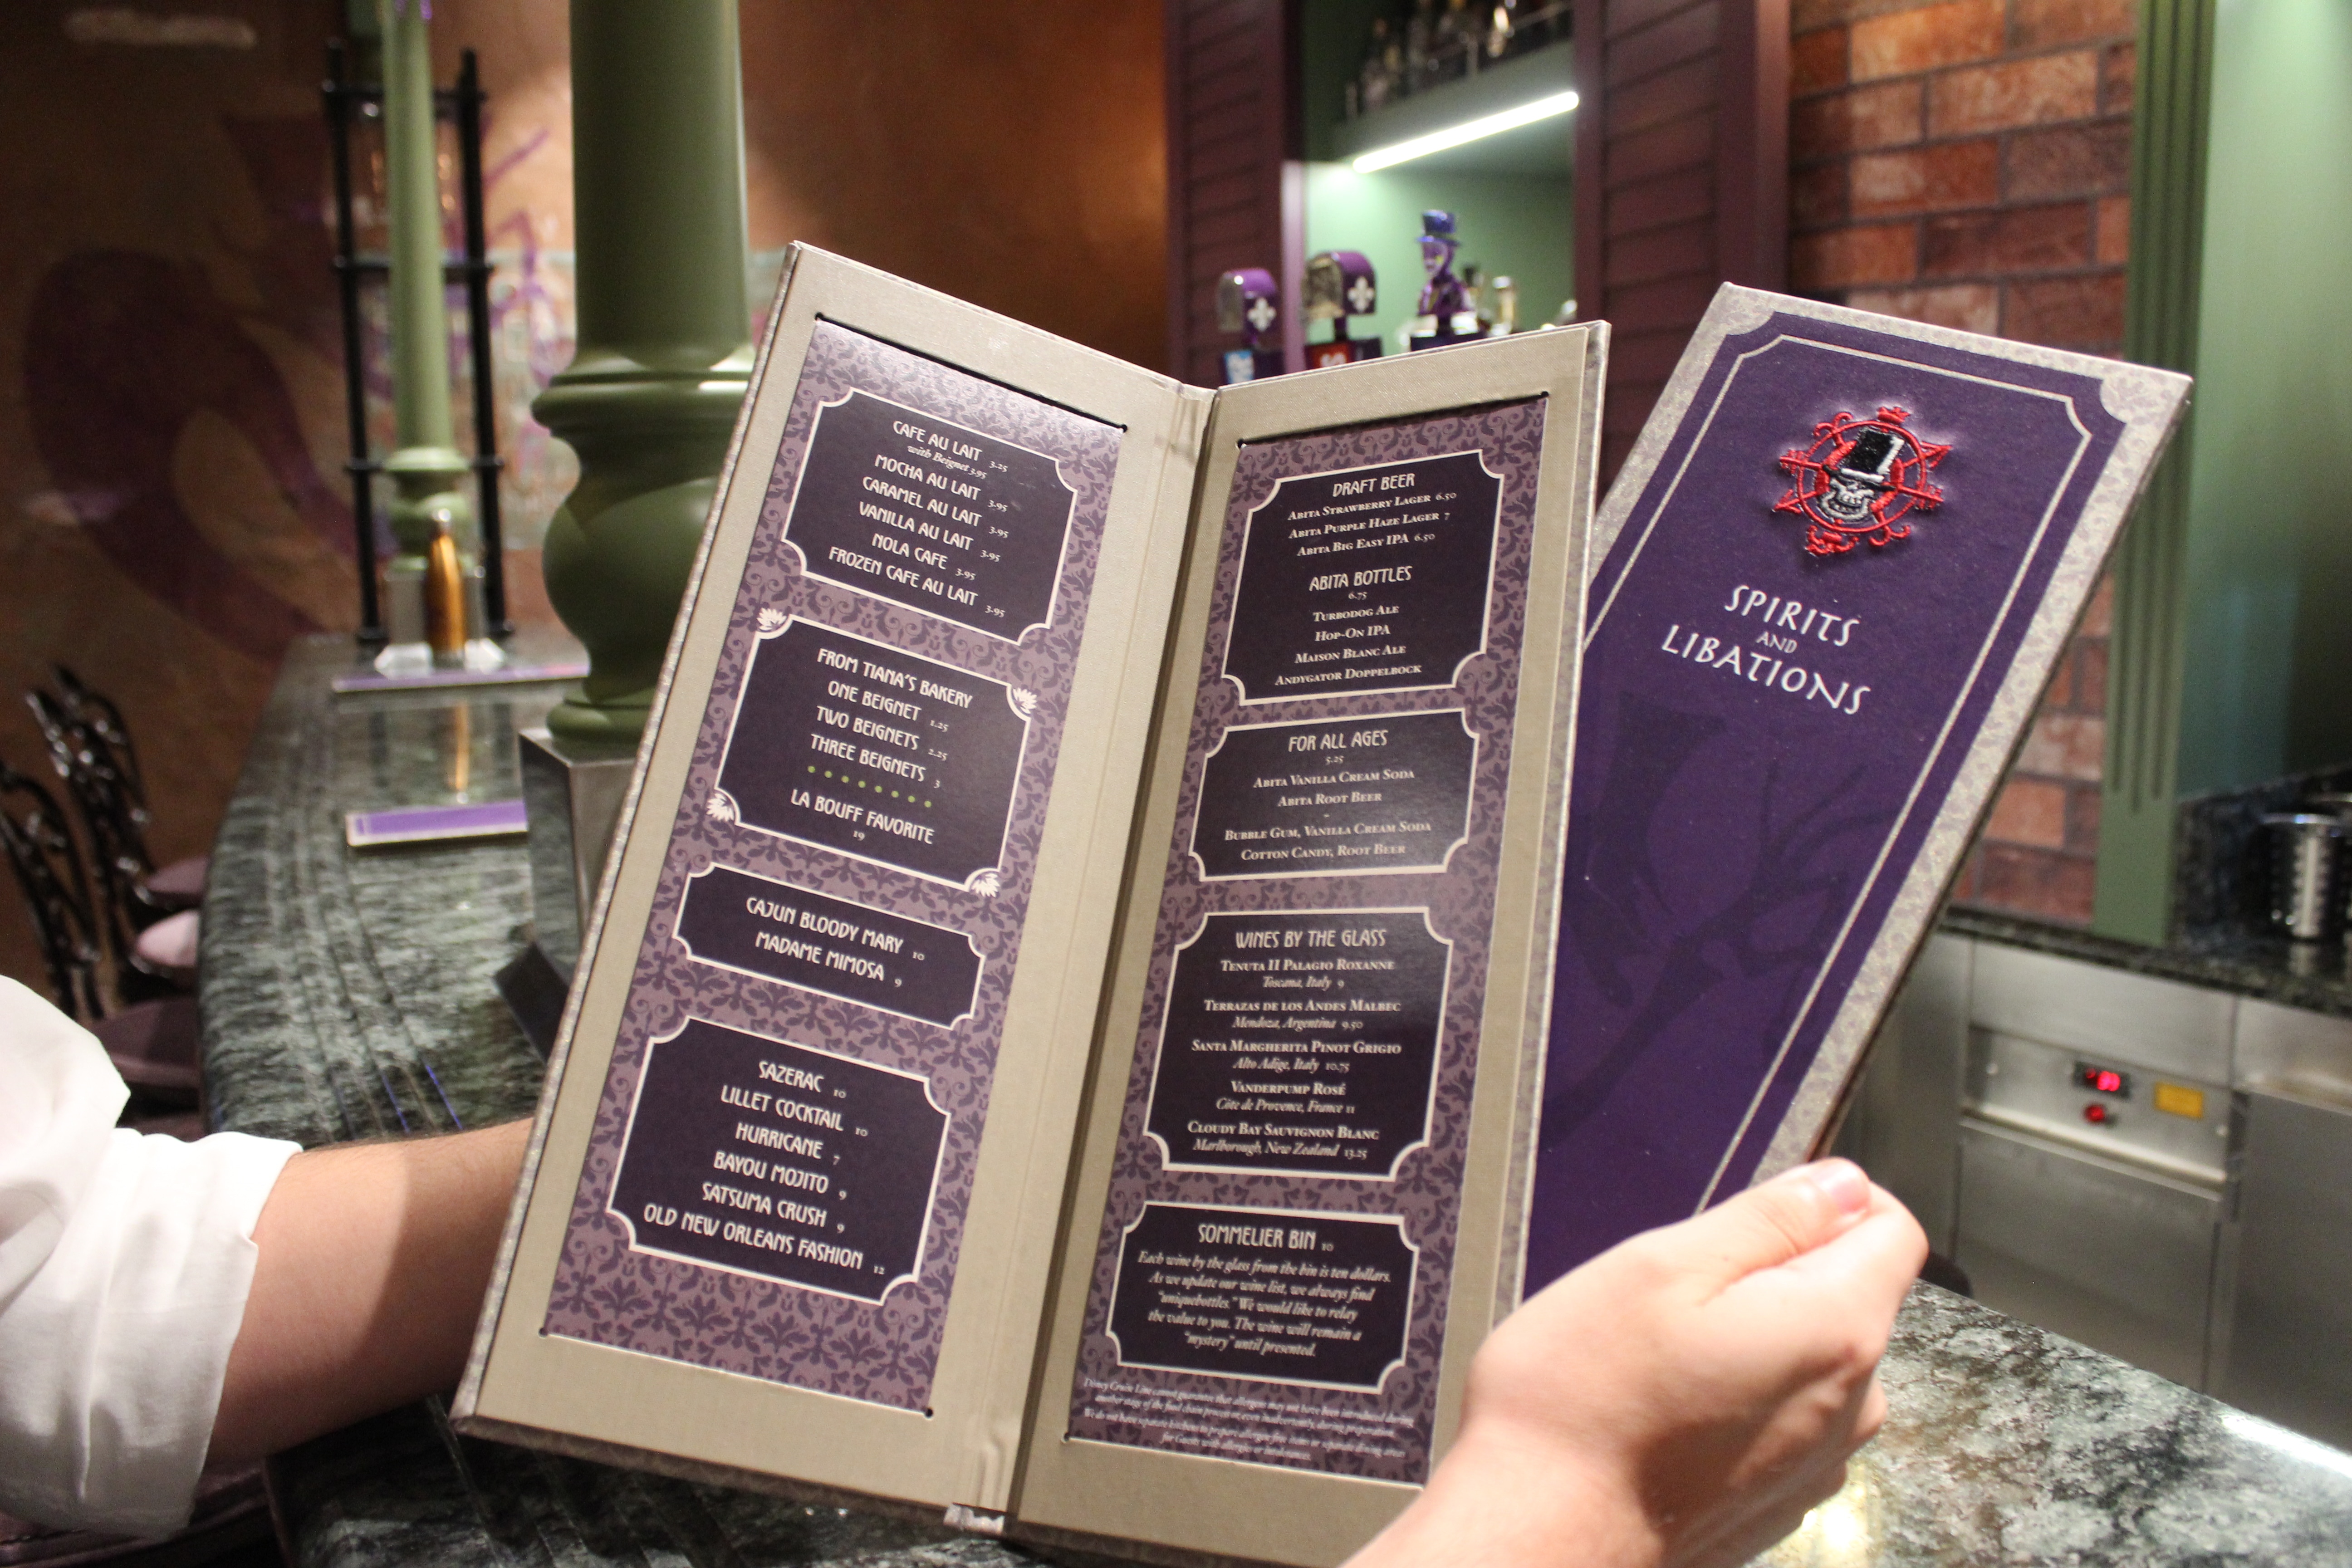 The menu covers a variety of drinks and sweet treats. The cover sports an image of the Shadow Man that appears and disappears depending on the light.